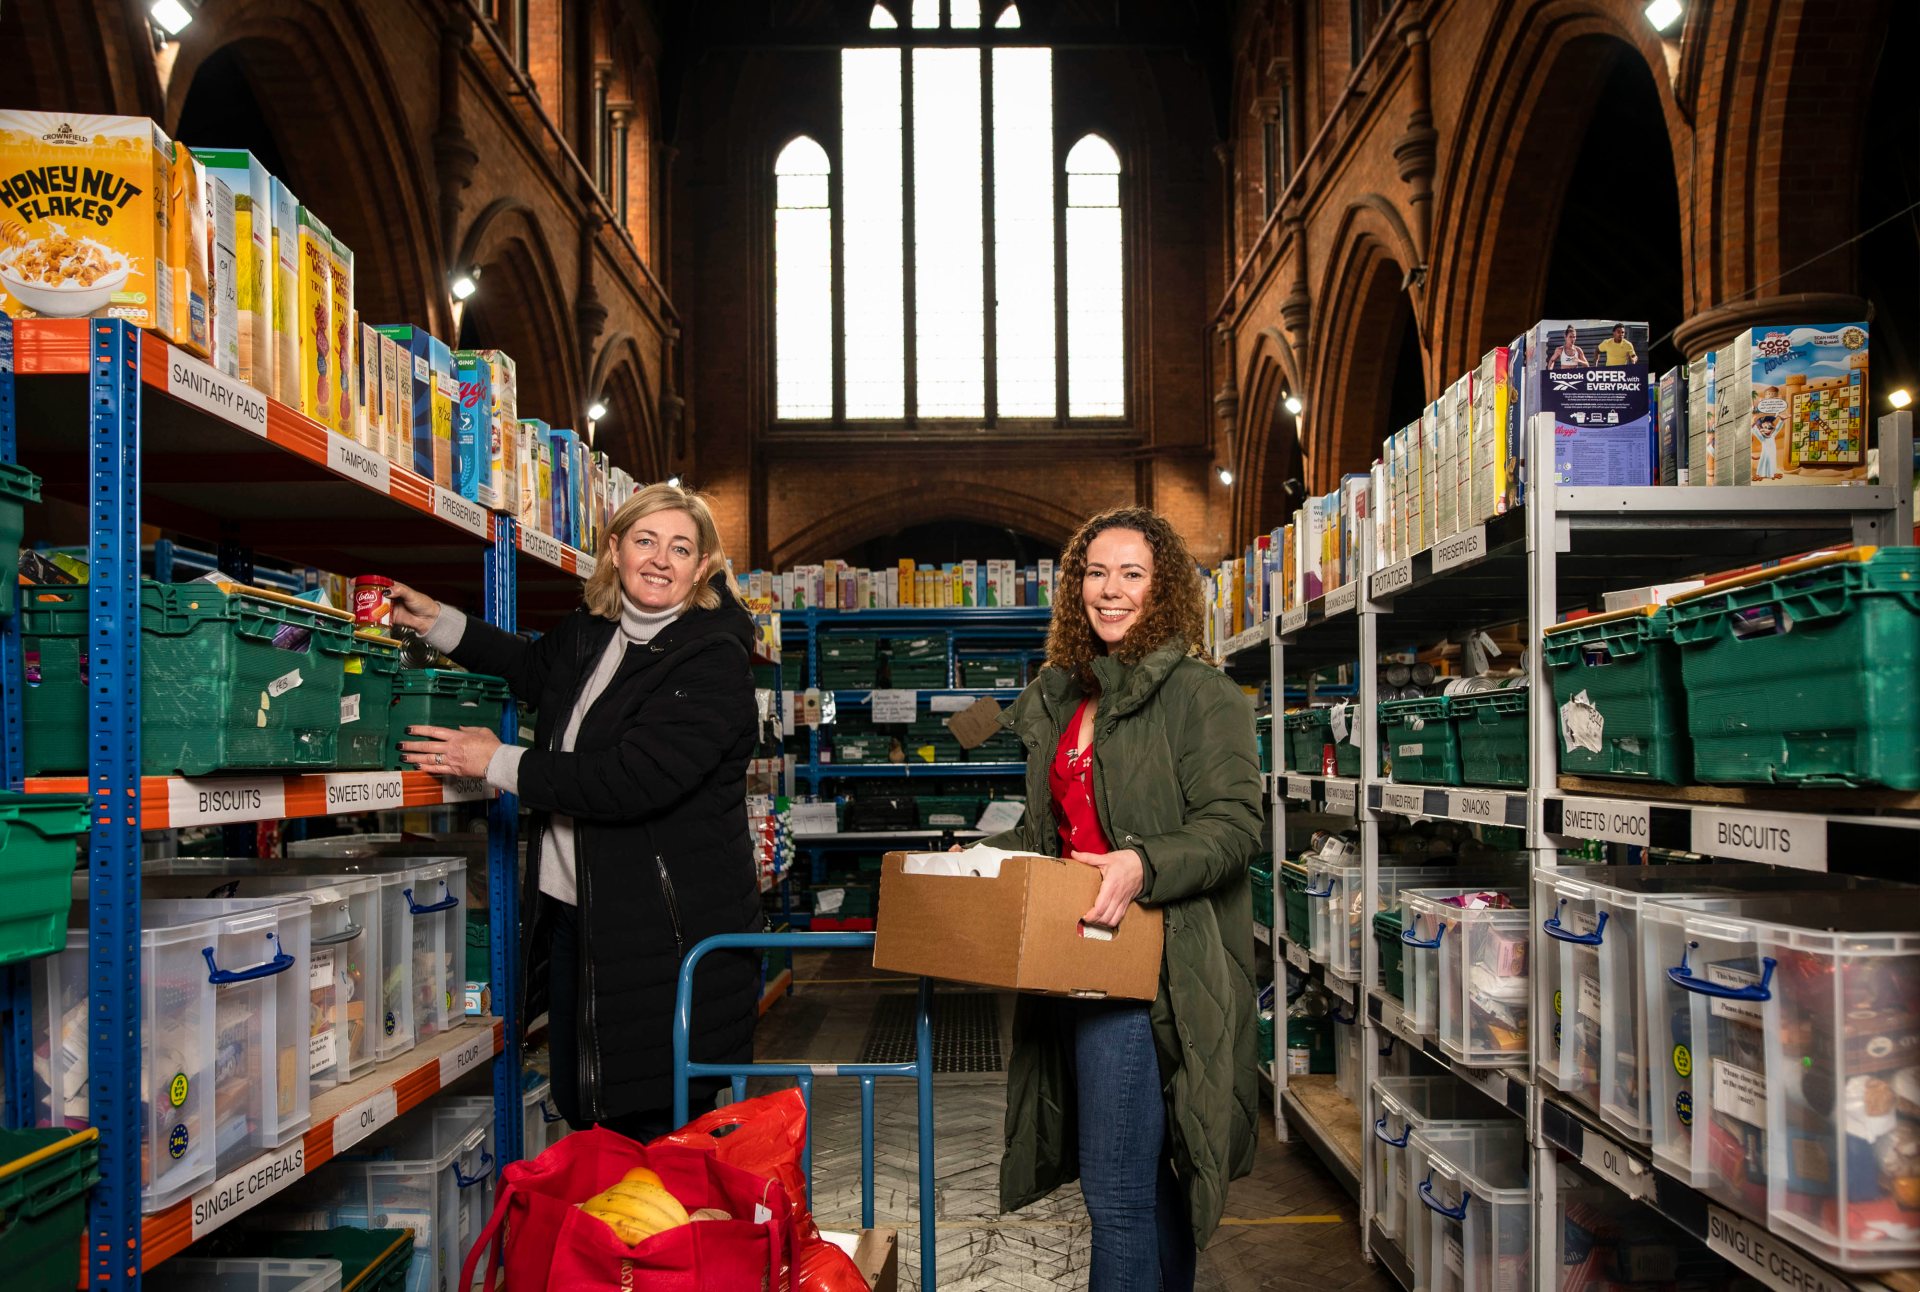 The Trussell Trust's Angela Miller (left) and Vodafone's Rachel Evans helping out at a London food bank